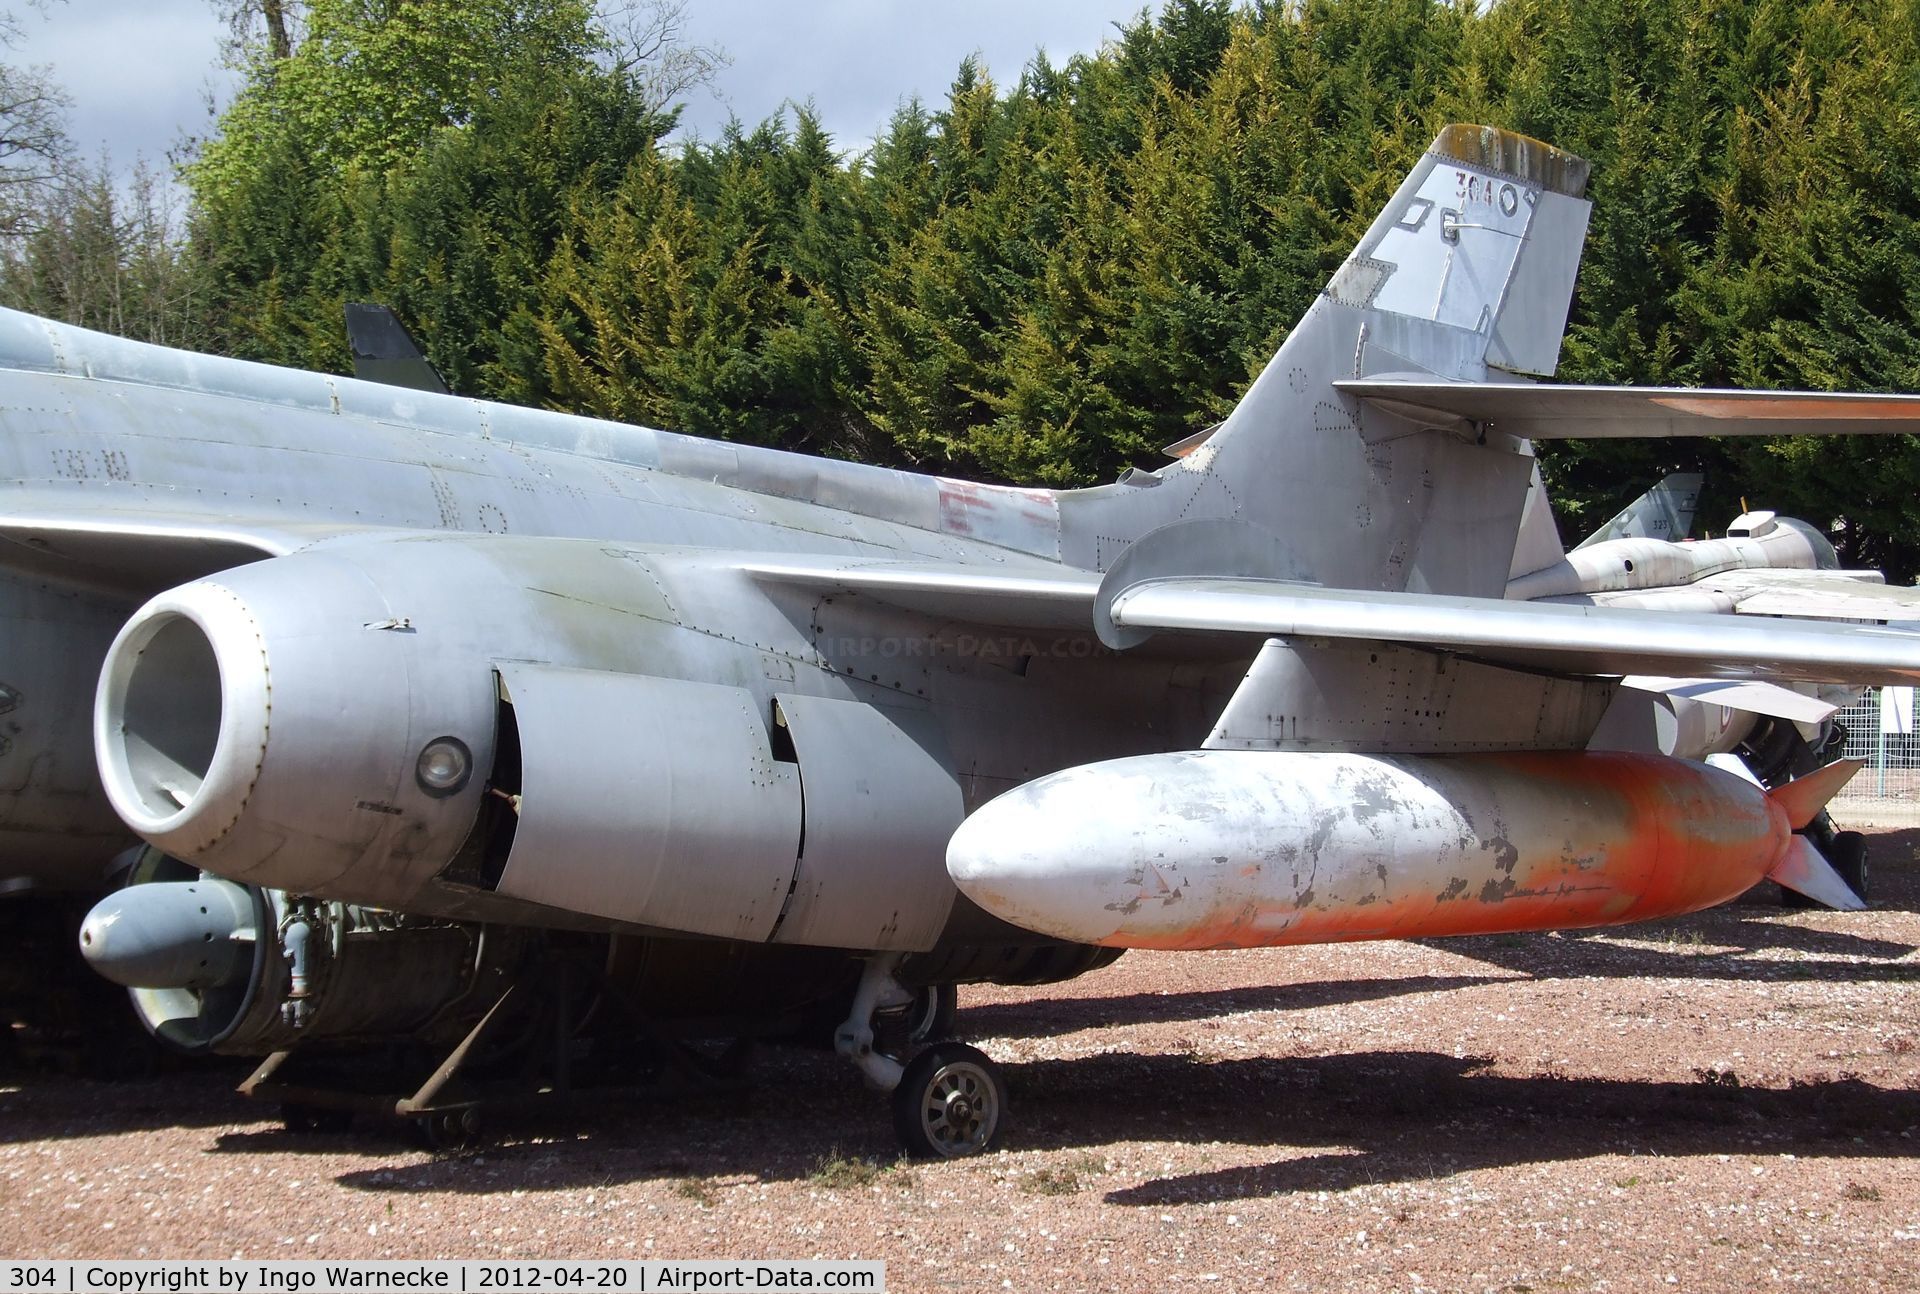 304, 1956 Sud Aviation SO.4050 Vautour IIN C/N 11, Sud-Ouest SO.4050 Vautour II N (radar-testbed at CEAM/CEV) at the Musee de l'Aviation du Chateau, Savigny-les-Beaune